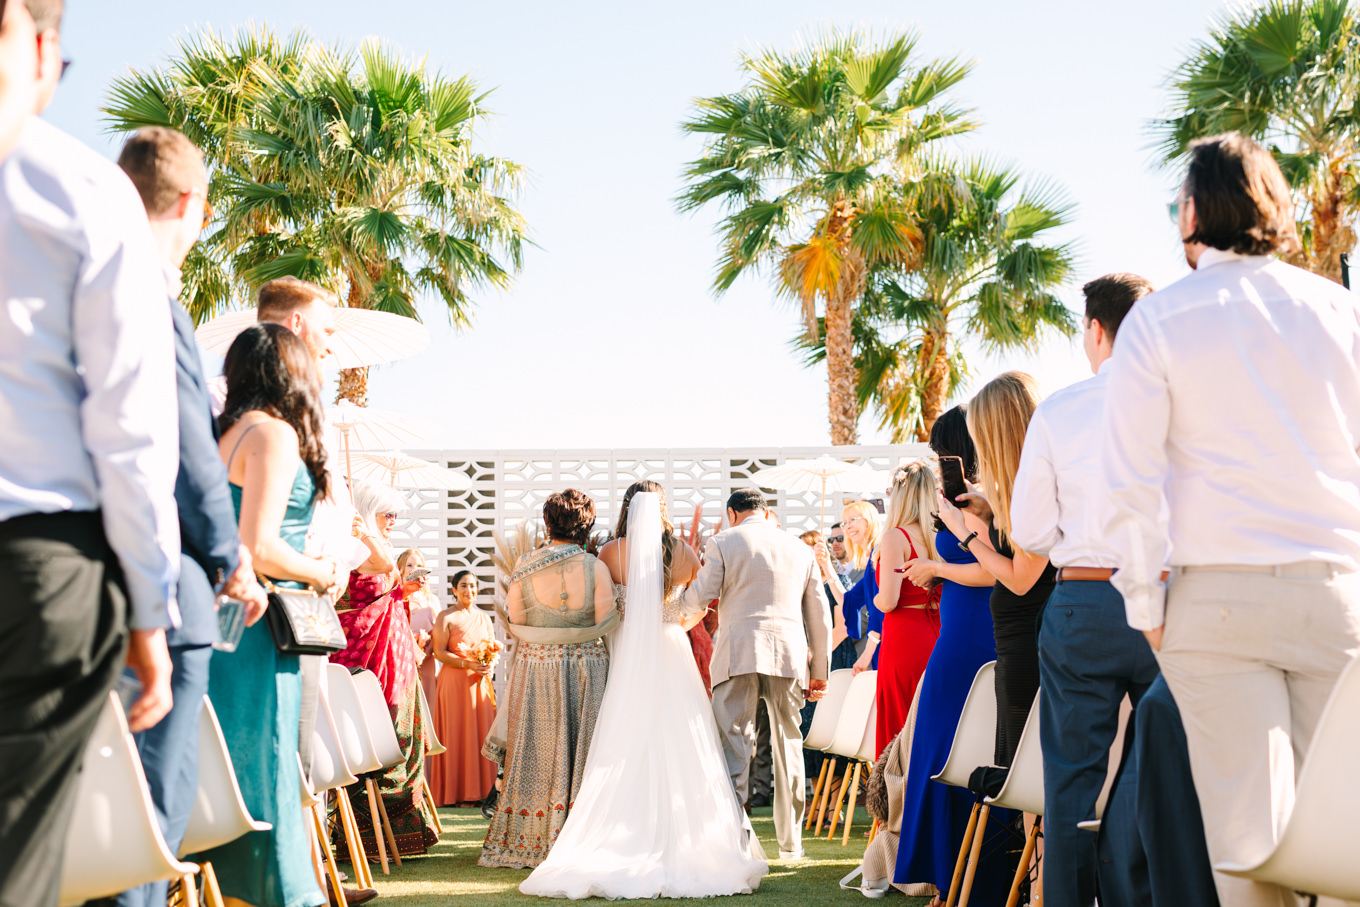 Bride walking down the aisle from the back | Pink and orange Lautner Compound wedding | Colorful Palm Springs wedding photography | #palmspringsphotographer #palmspringswedding #lautnercompound #southerncaliforniawedding  Source: Mary Costa Photography | Los Angeles